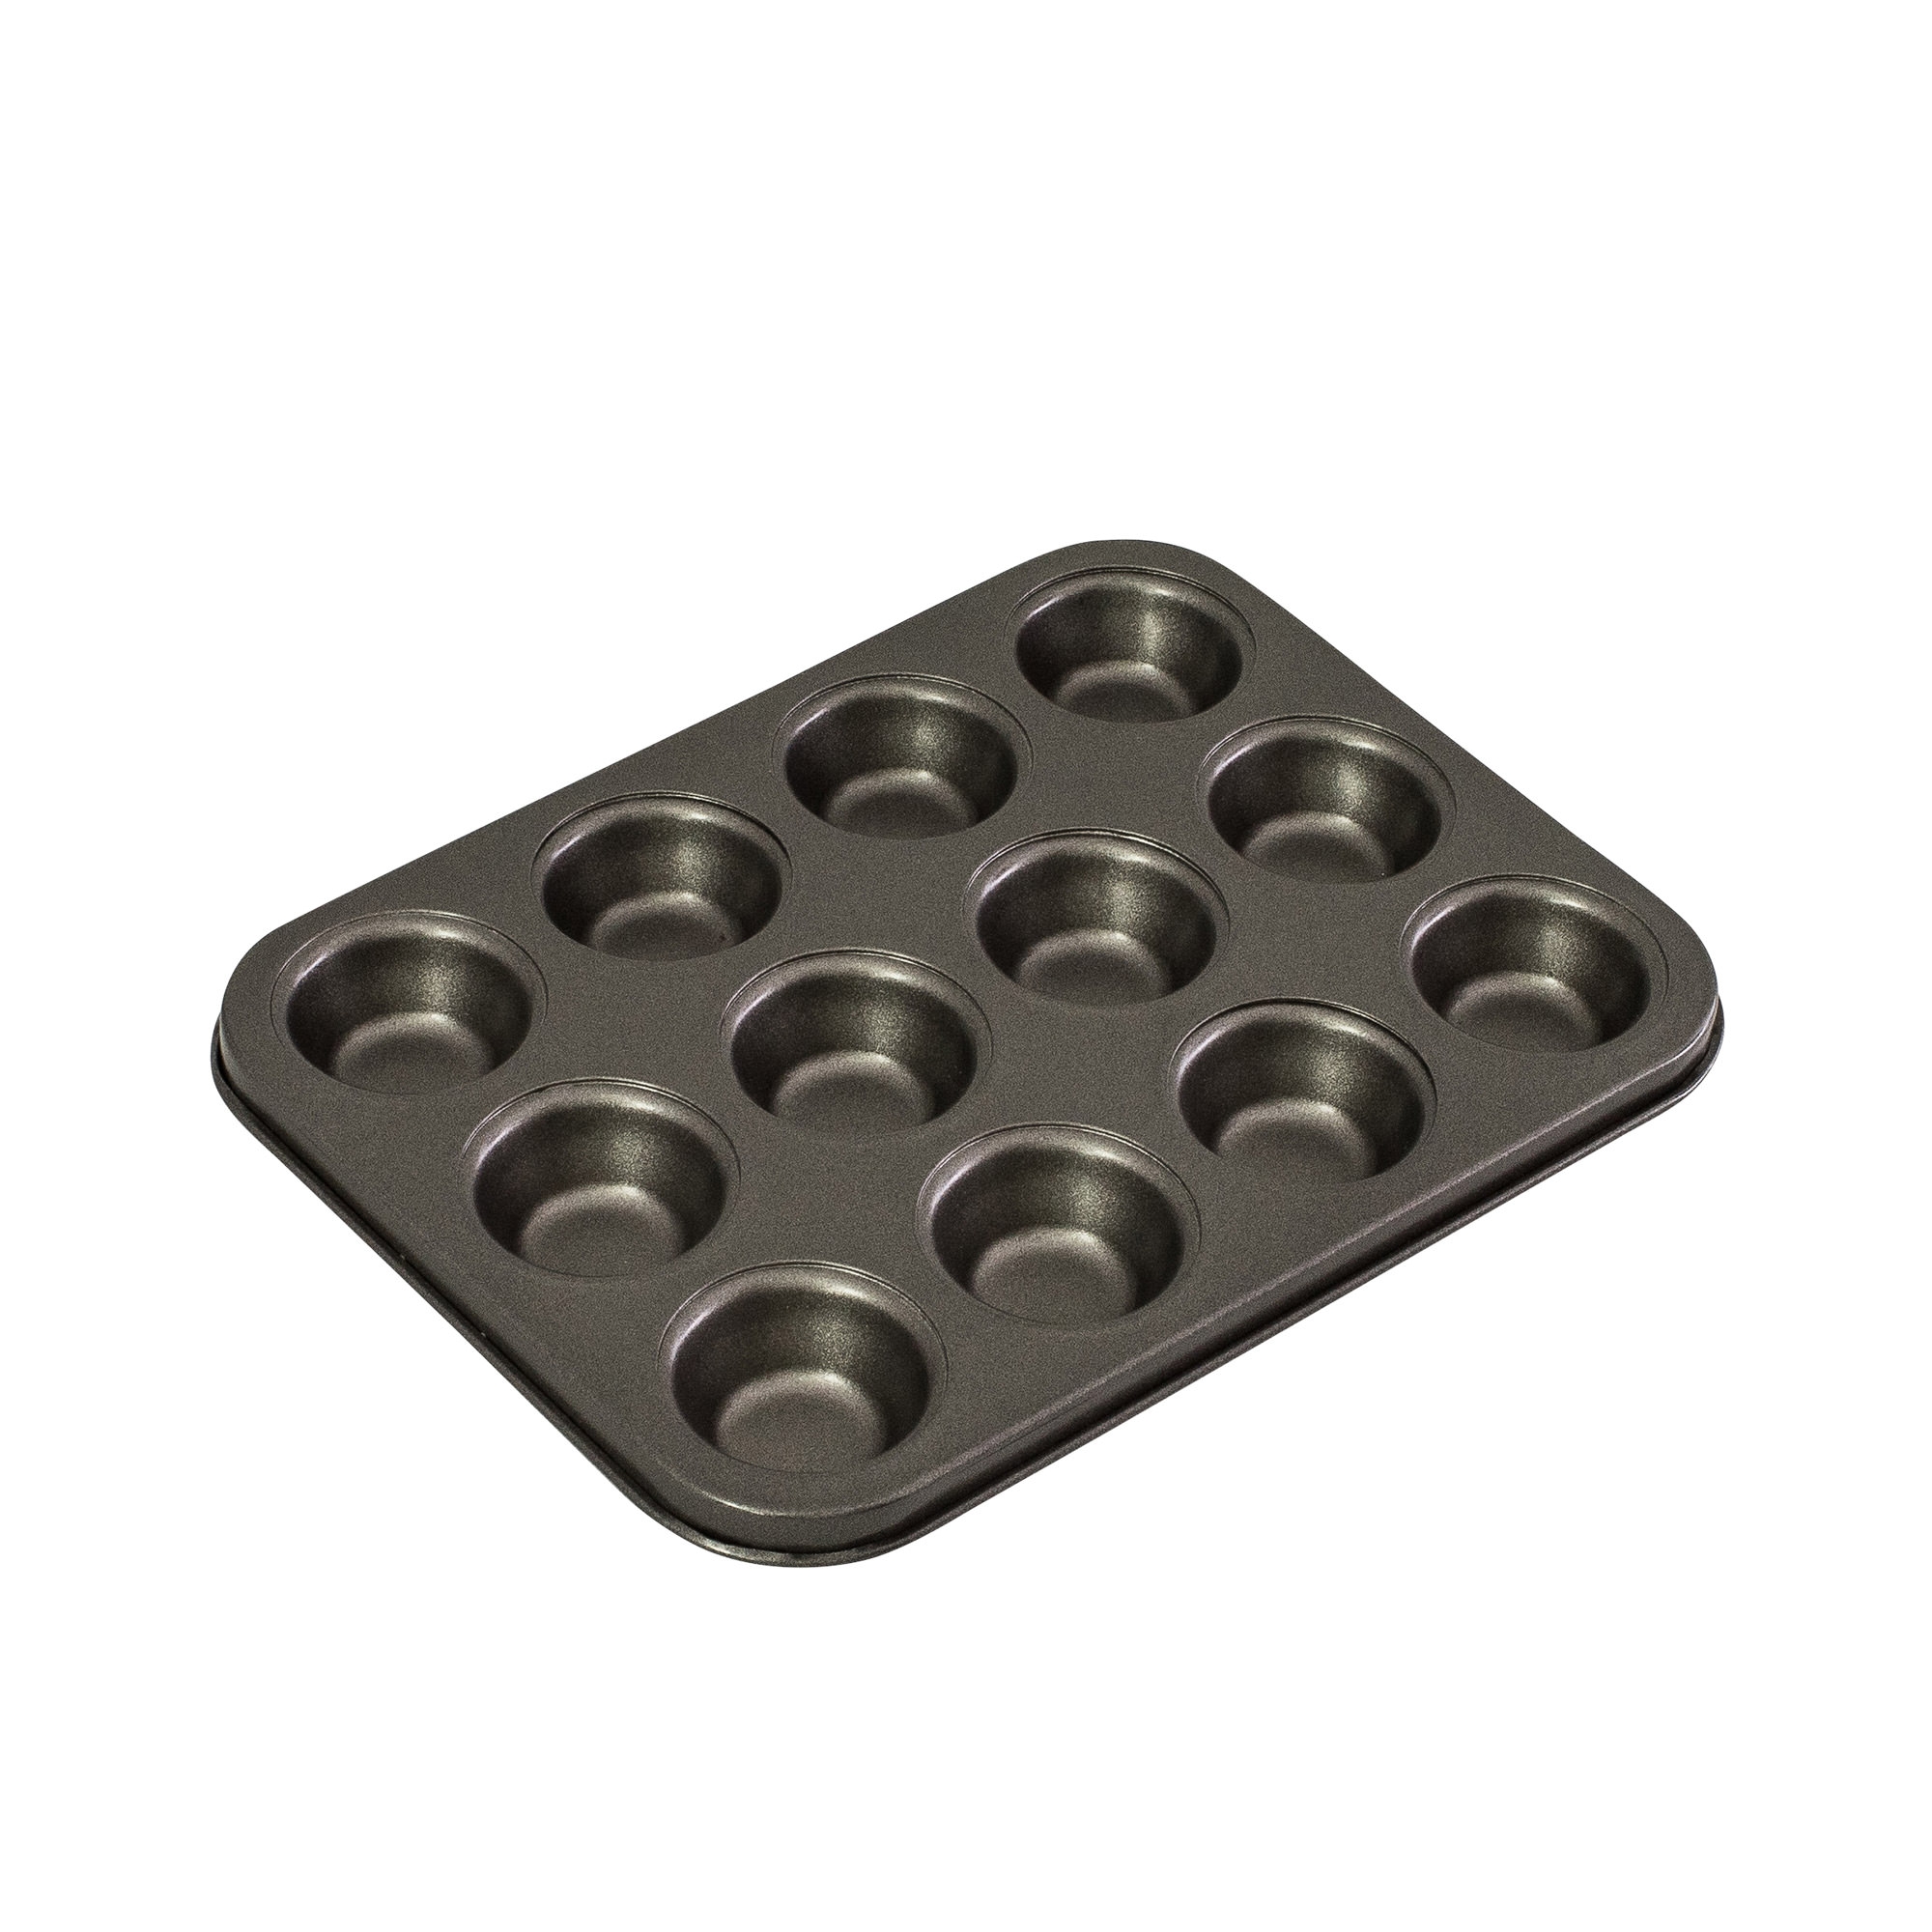 Bakemaster Non Stick Mini Muffin Pan 12 Cup Image 1